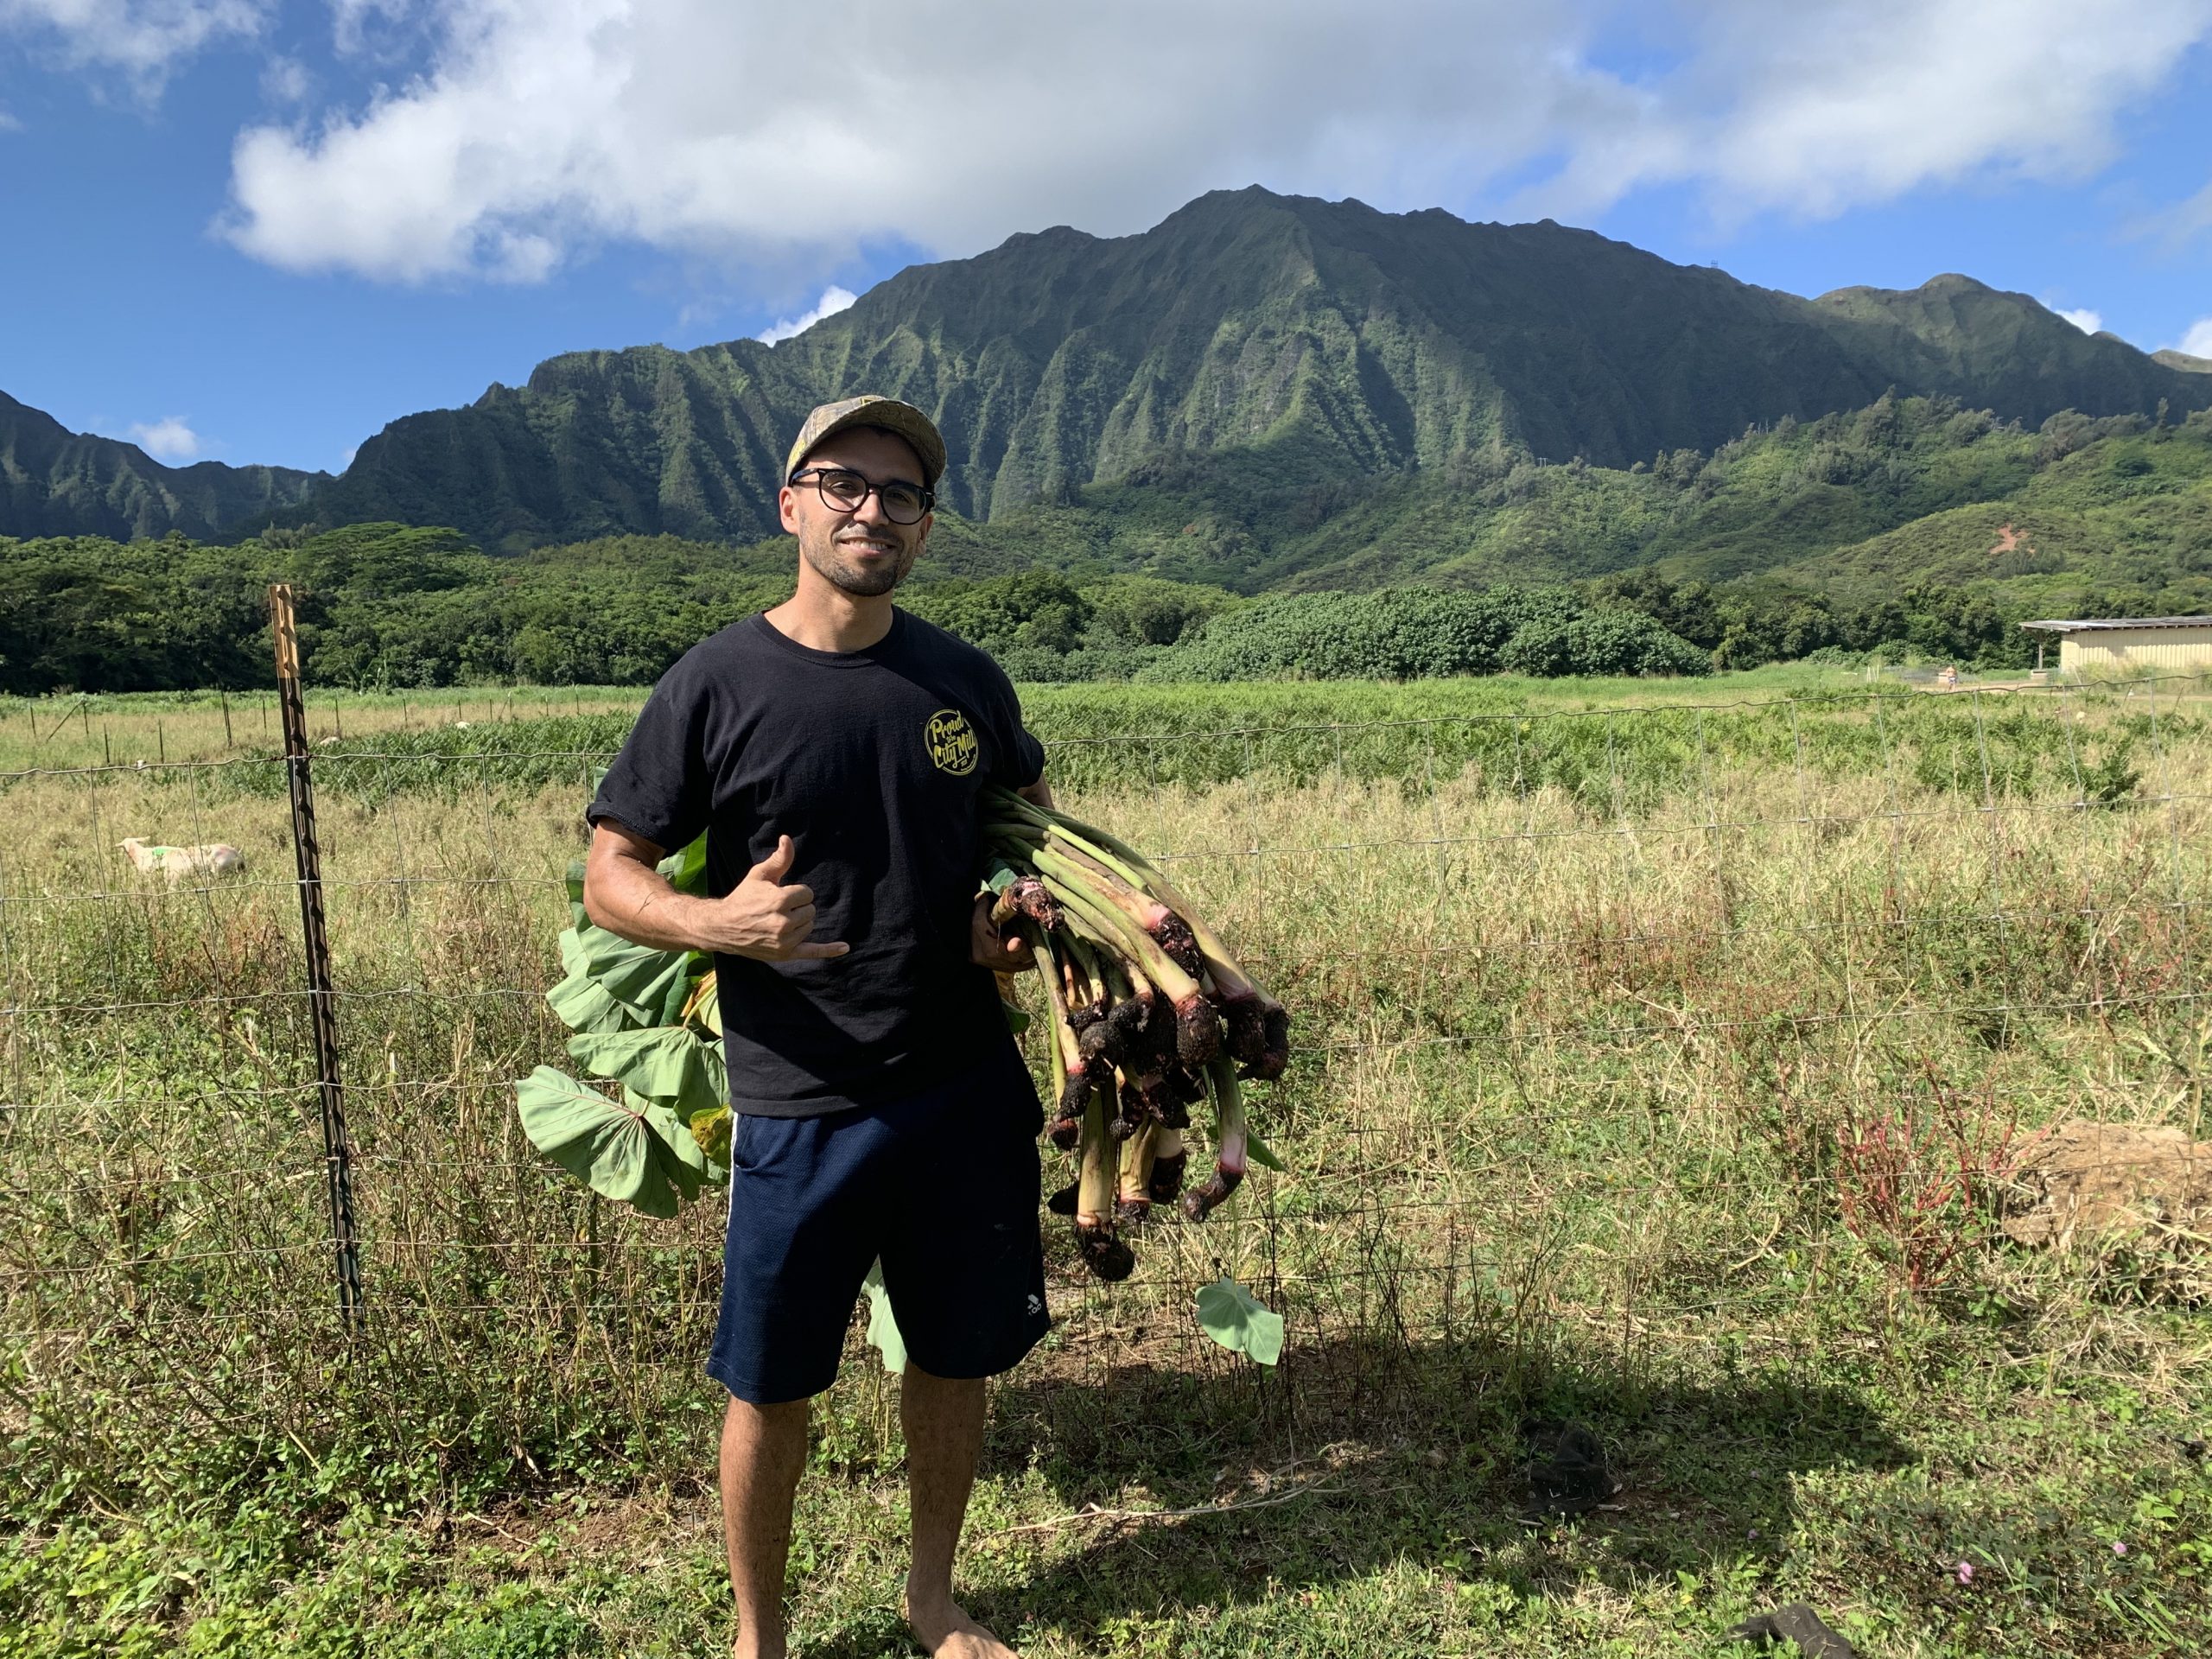 holdng taro leaf in a farm in Hawai’i with koolau mountains in background